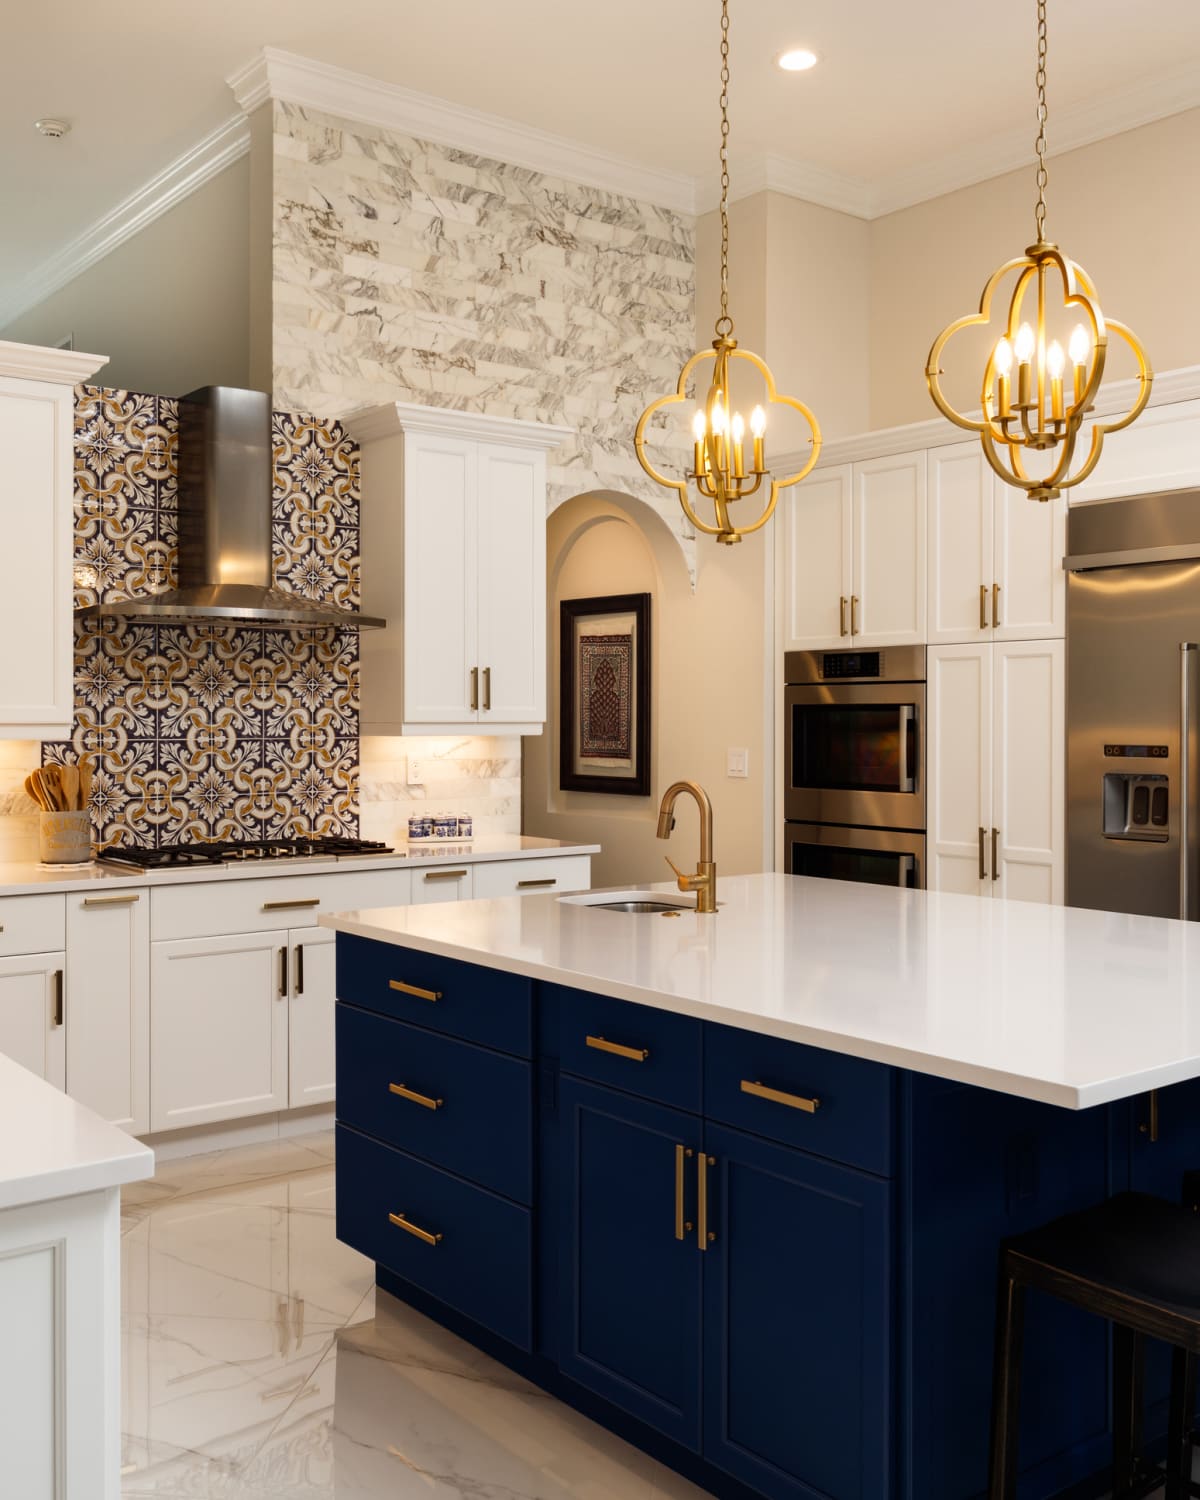 Beautiful luxury home kitchen with white cabinets